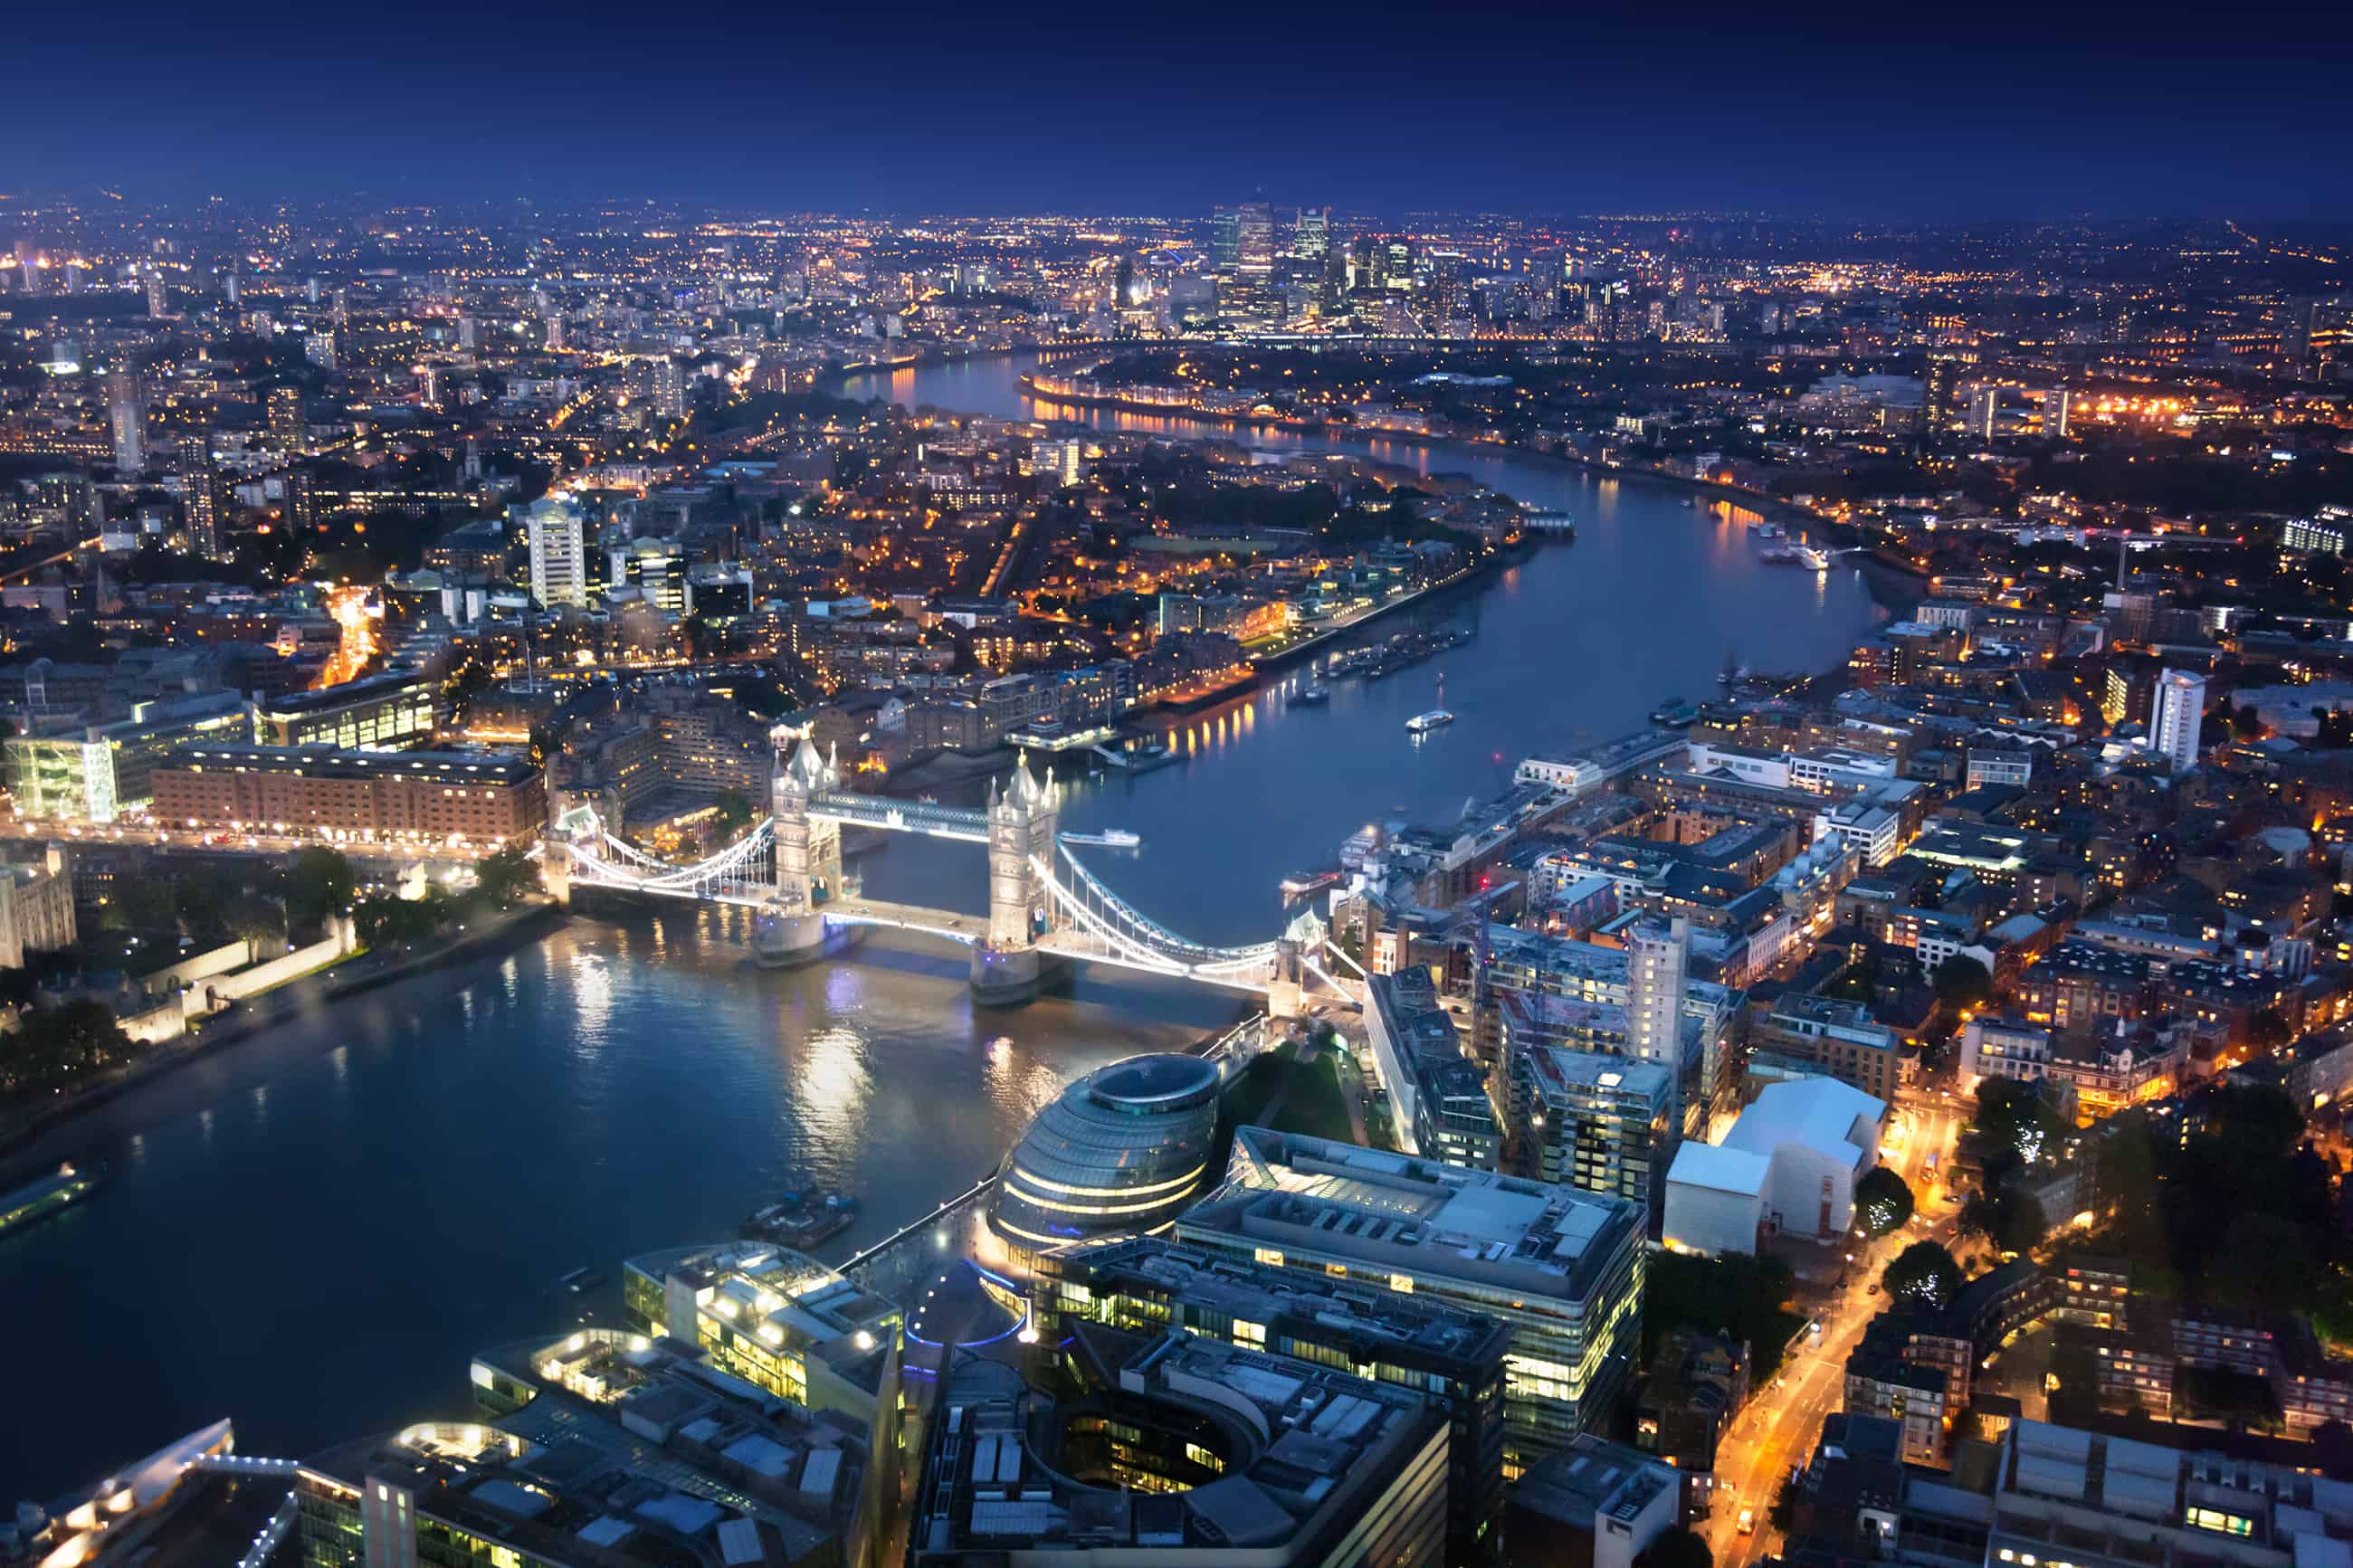 Astons: £56.2bn of real estate sold in London since January 2020